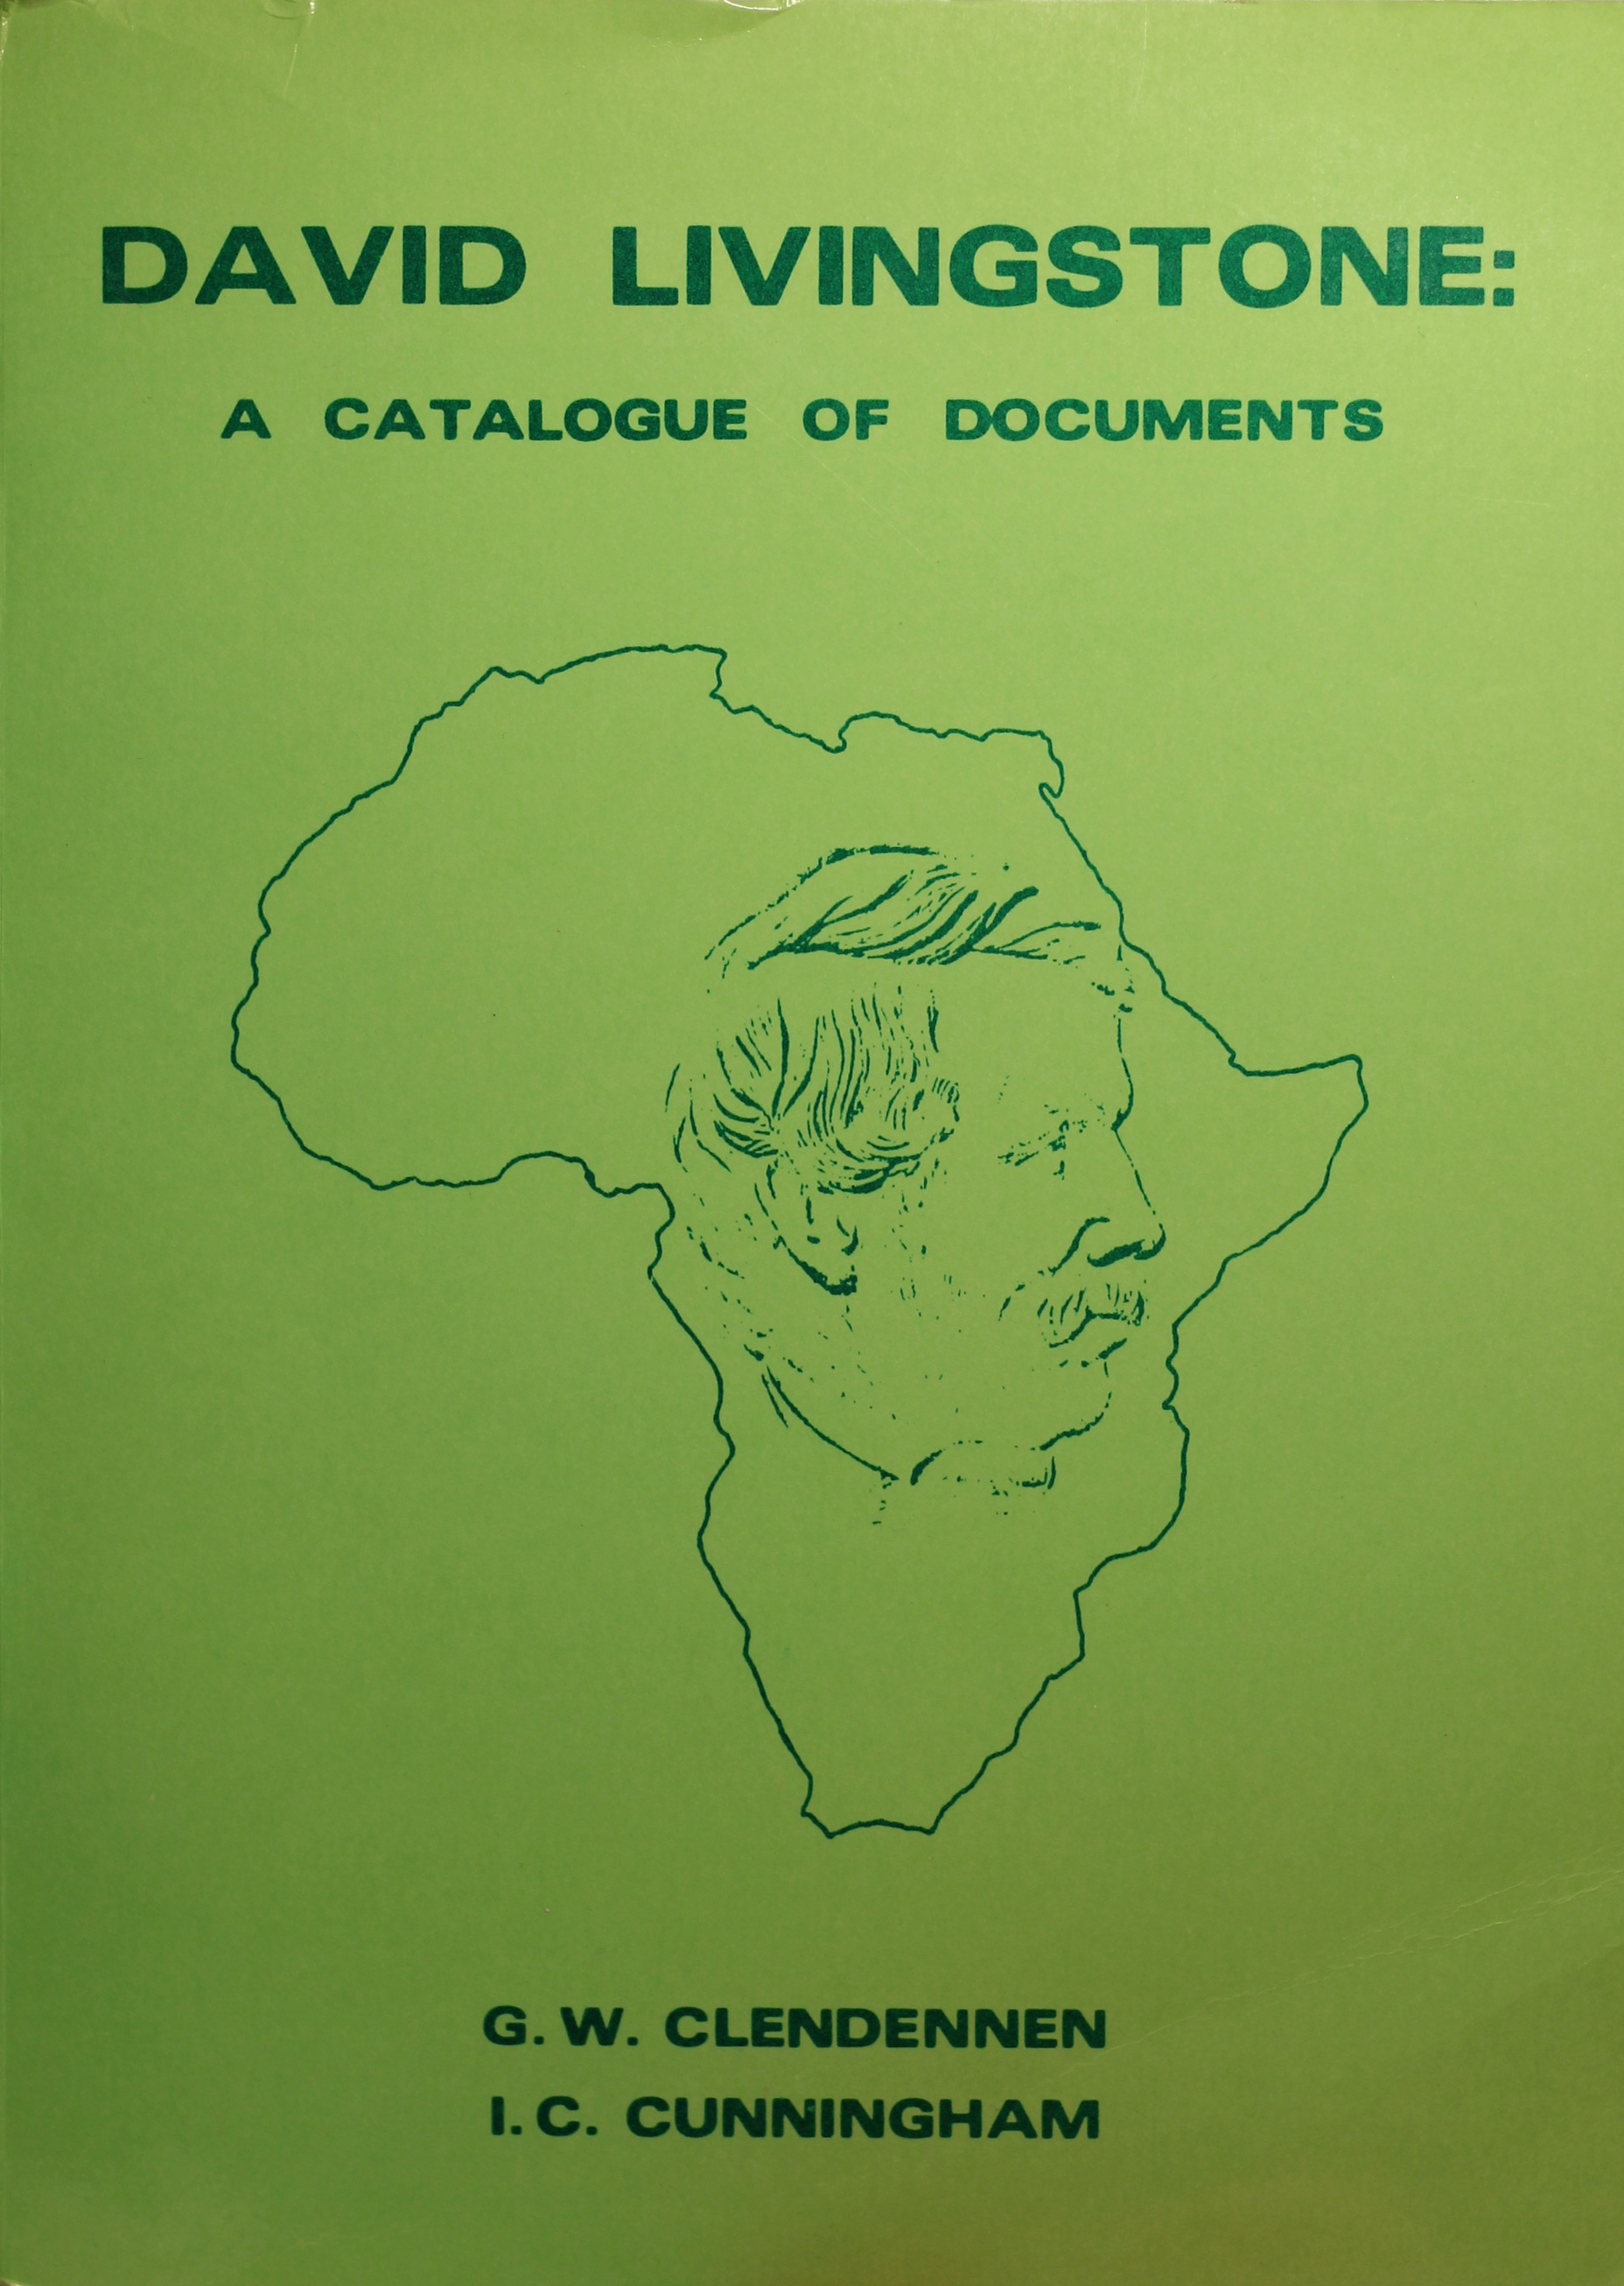 G.W. Clendennen and I.C. Cunningham, David Livingstone: A Catalogue of Documents (Edinburgh: National Library of Scotland, 1979). Open Government License v3.0 (http://www.nationalarchives.gov.uk/doc/open-government-licence/version/3/).